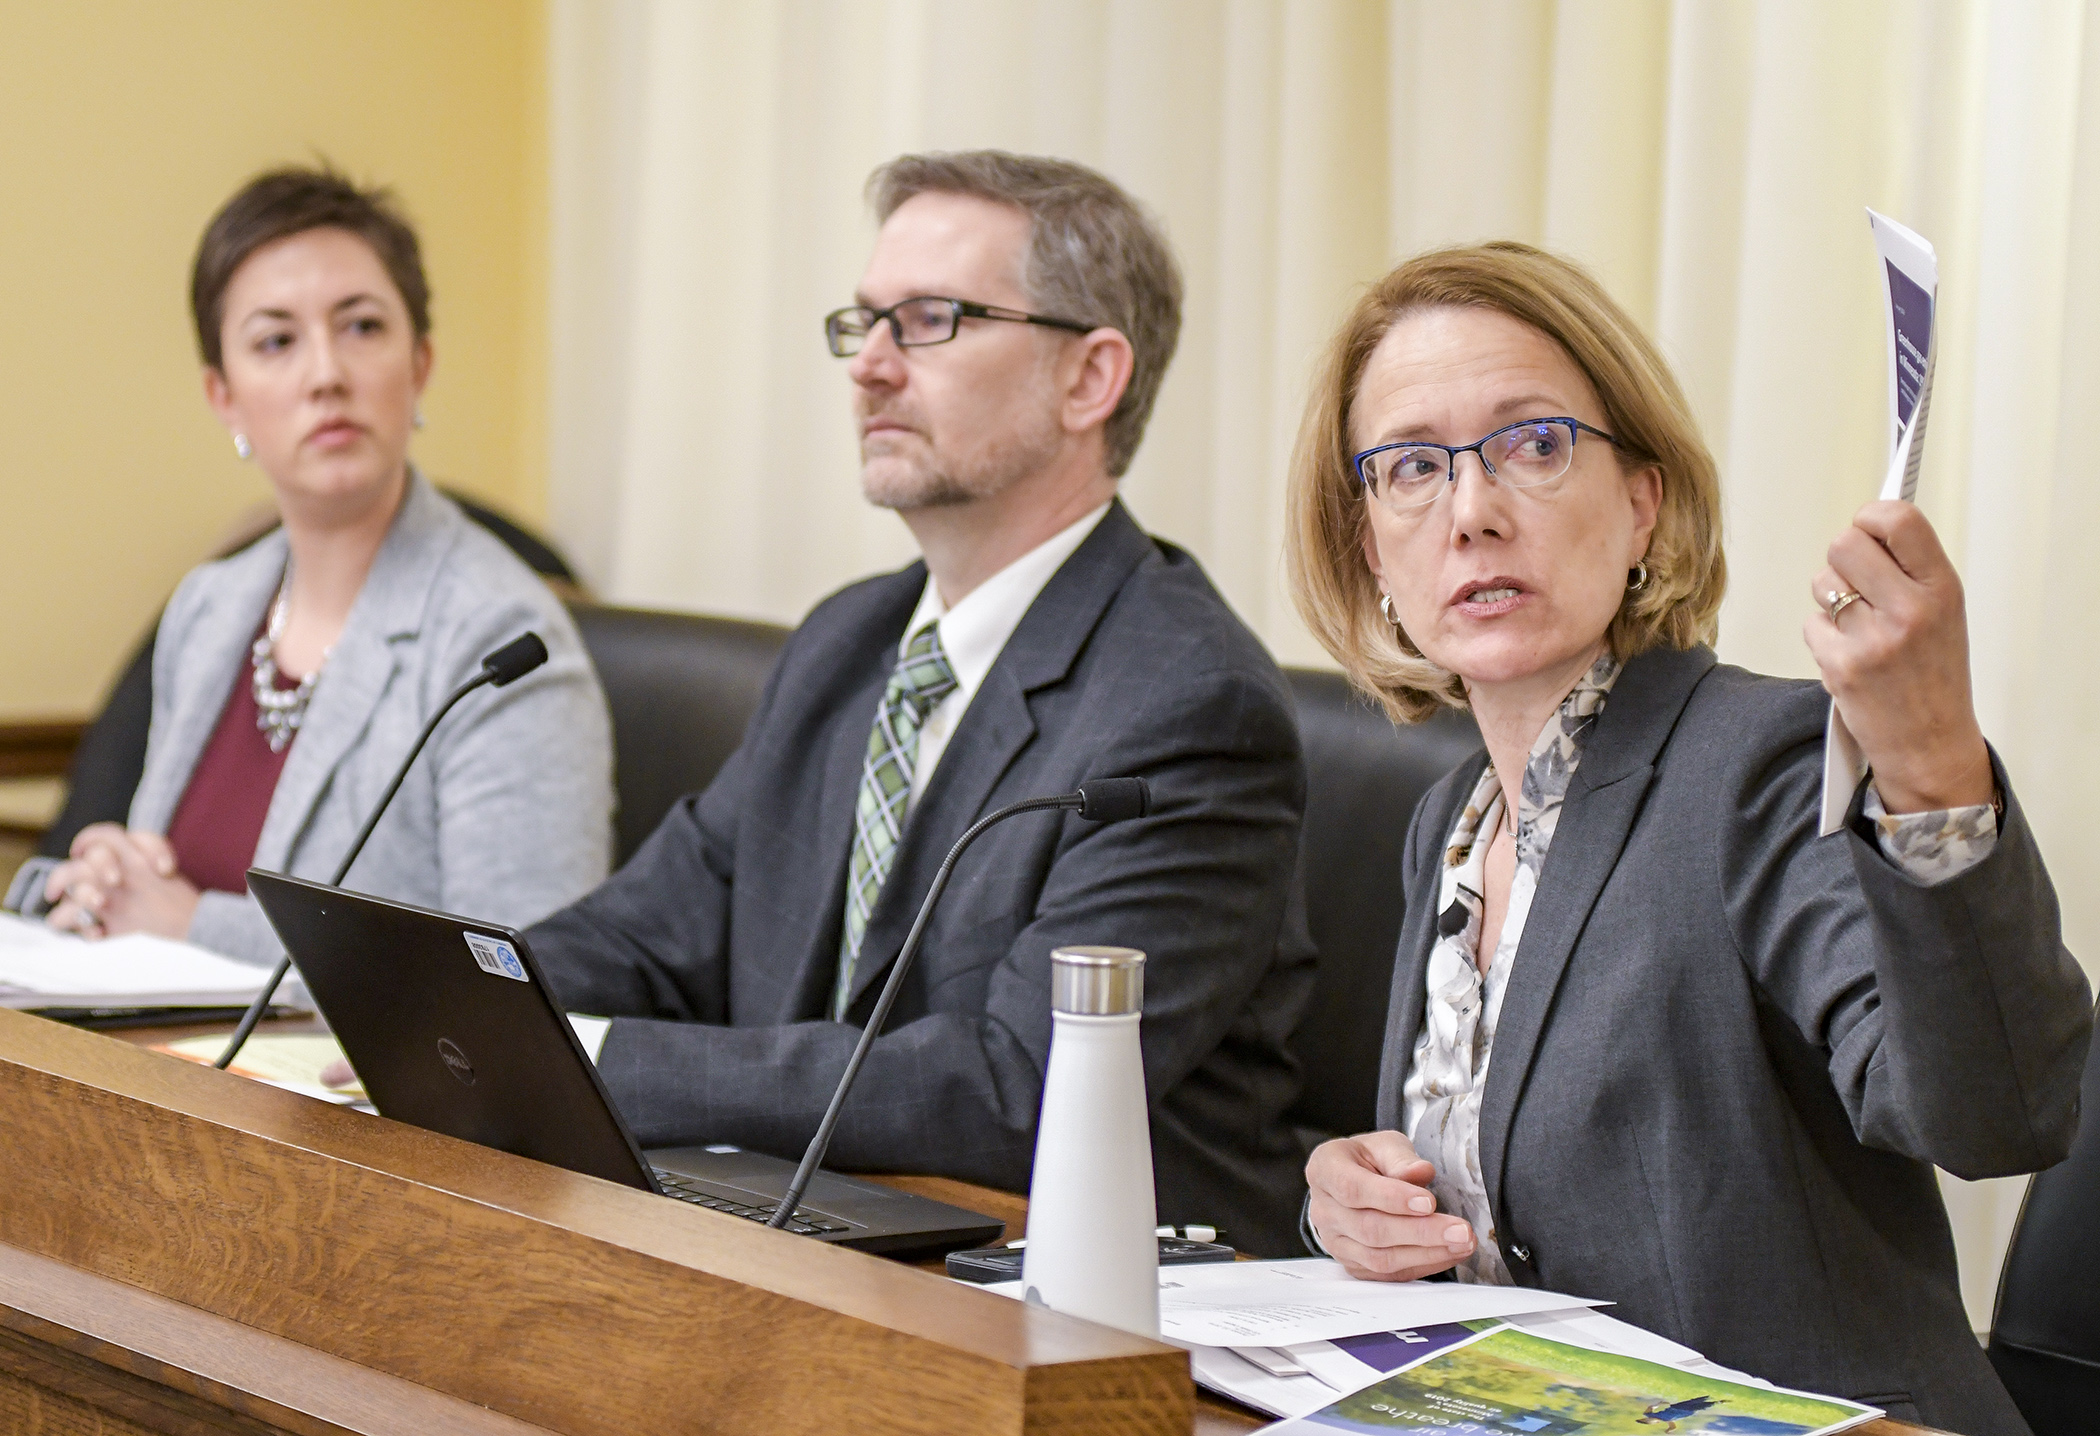 Greta Gauthier, right, assistant commissioner with the MPCA, testifies Jan. 22 before the House energy division. She is joined by State Energy Office Manager Jessica Burdette and Frank Kohlasch, PCA air policy/quality manager. Photo by Andrew VonBank